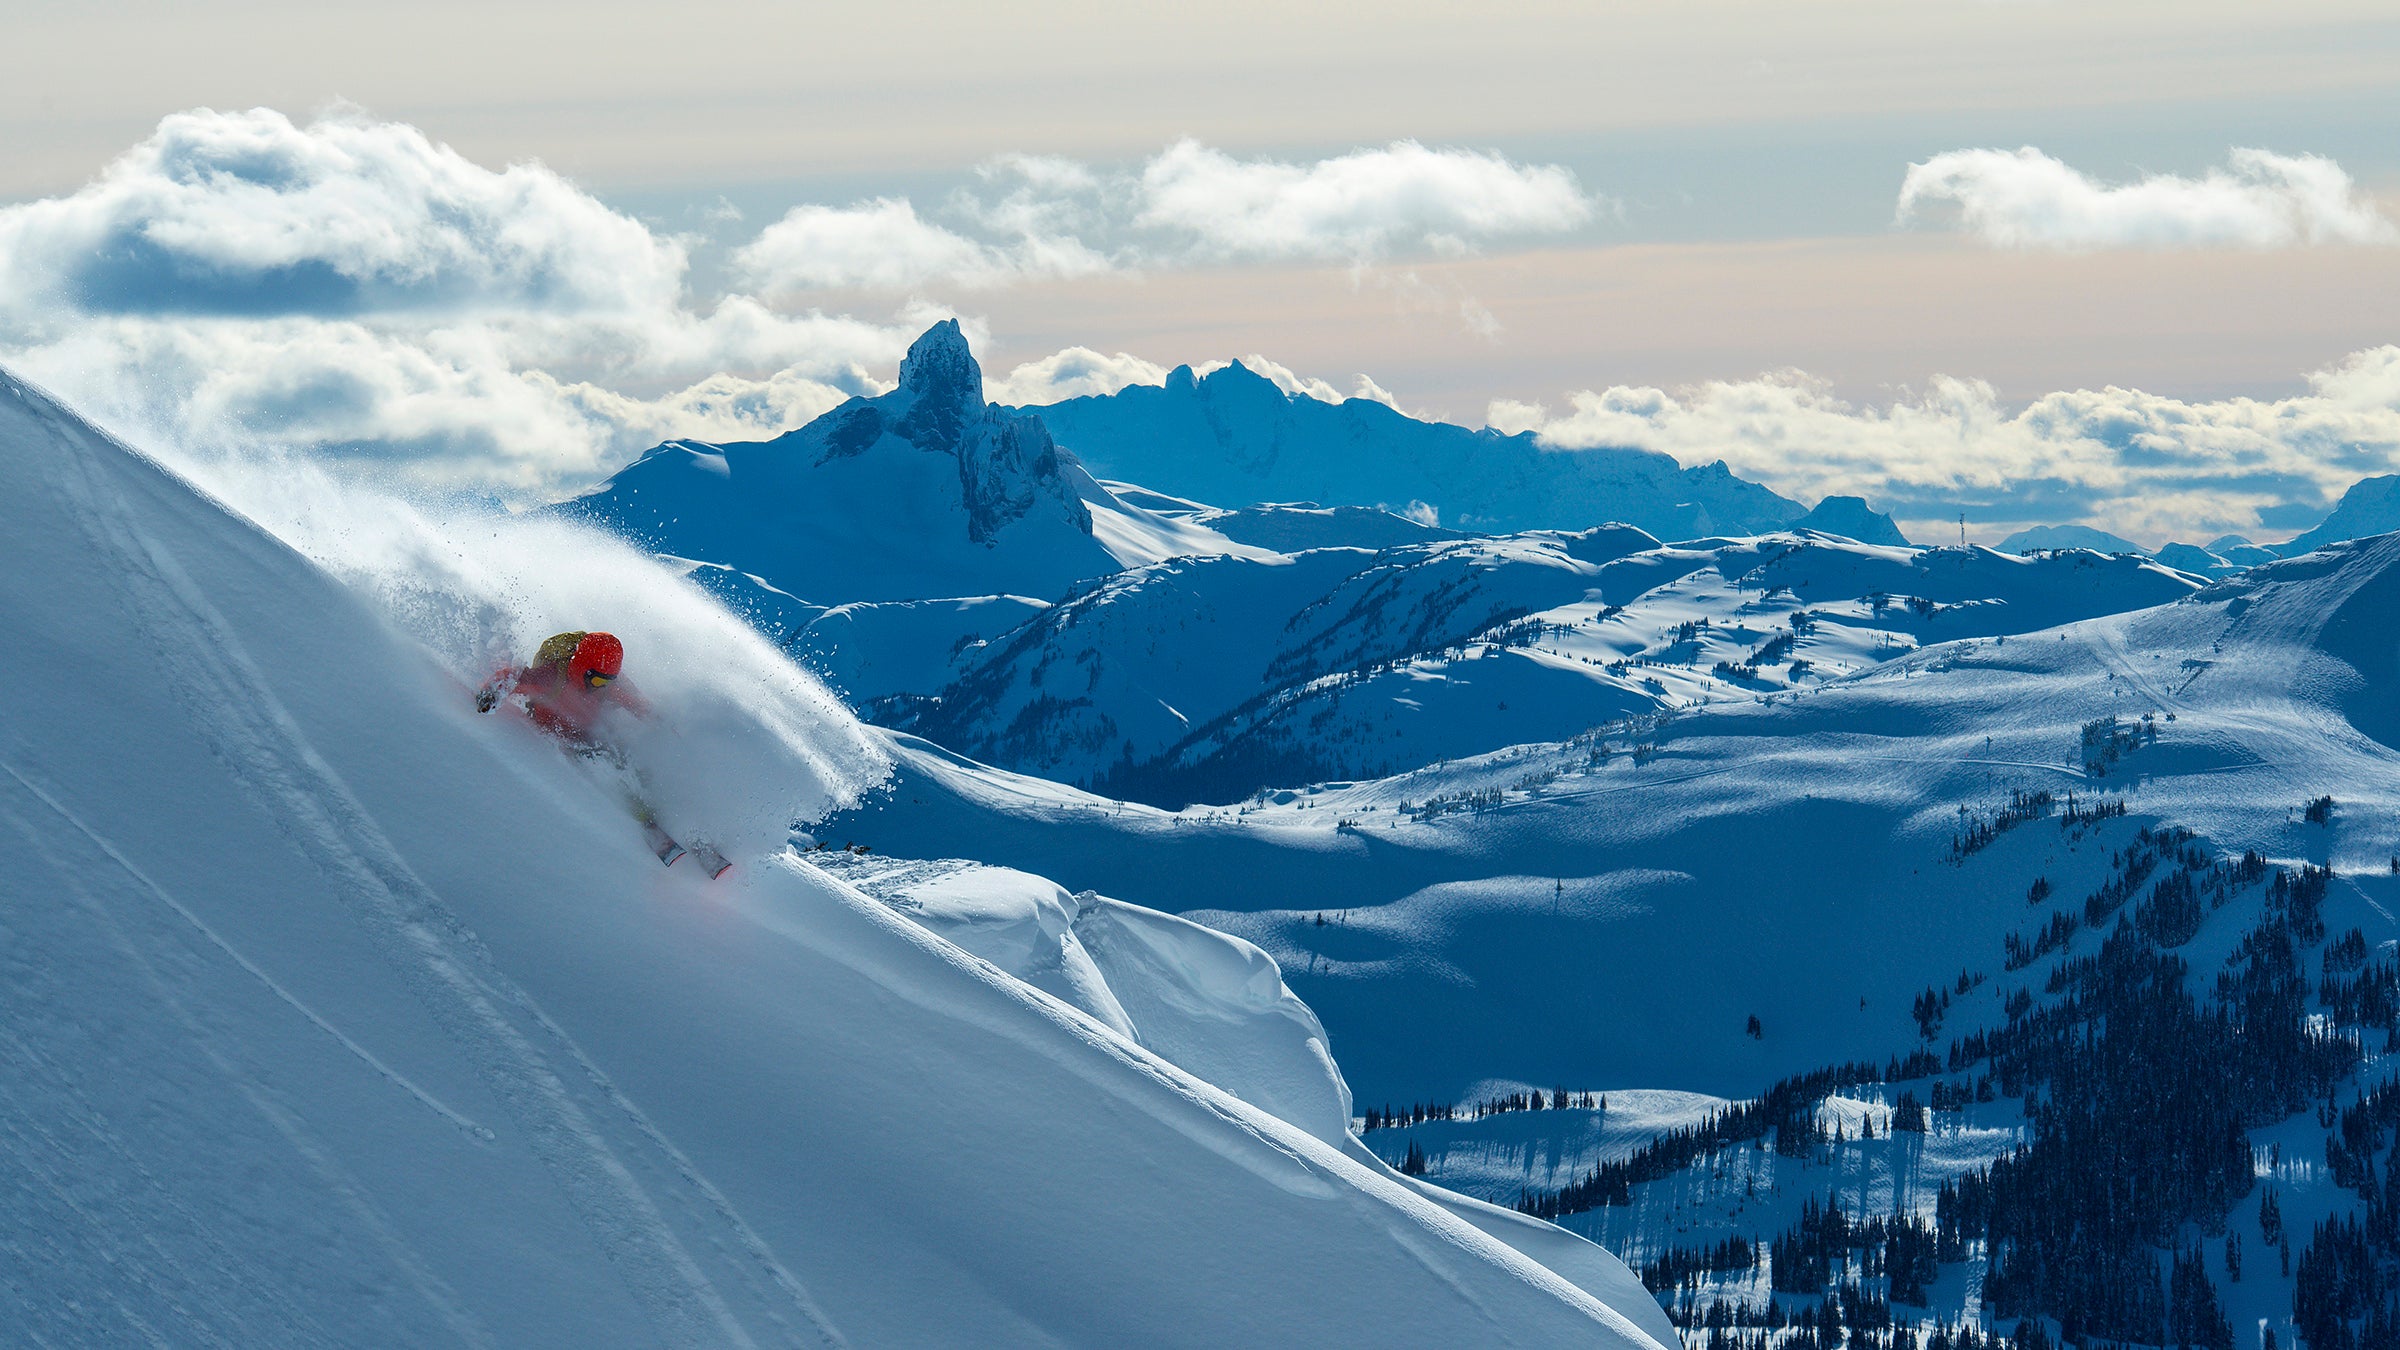 How to Plan the Ultimate Trip to Whistler Blackcomb